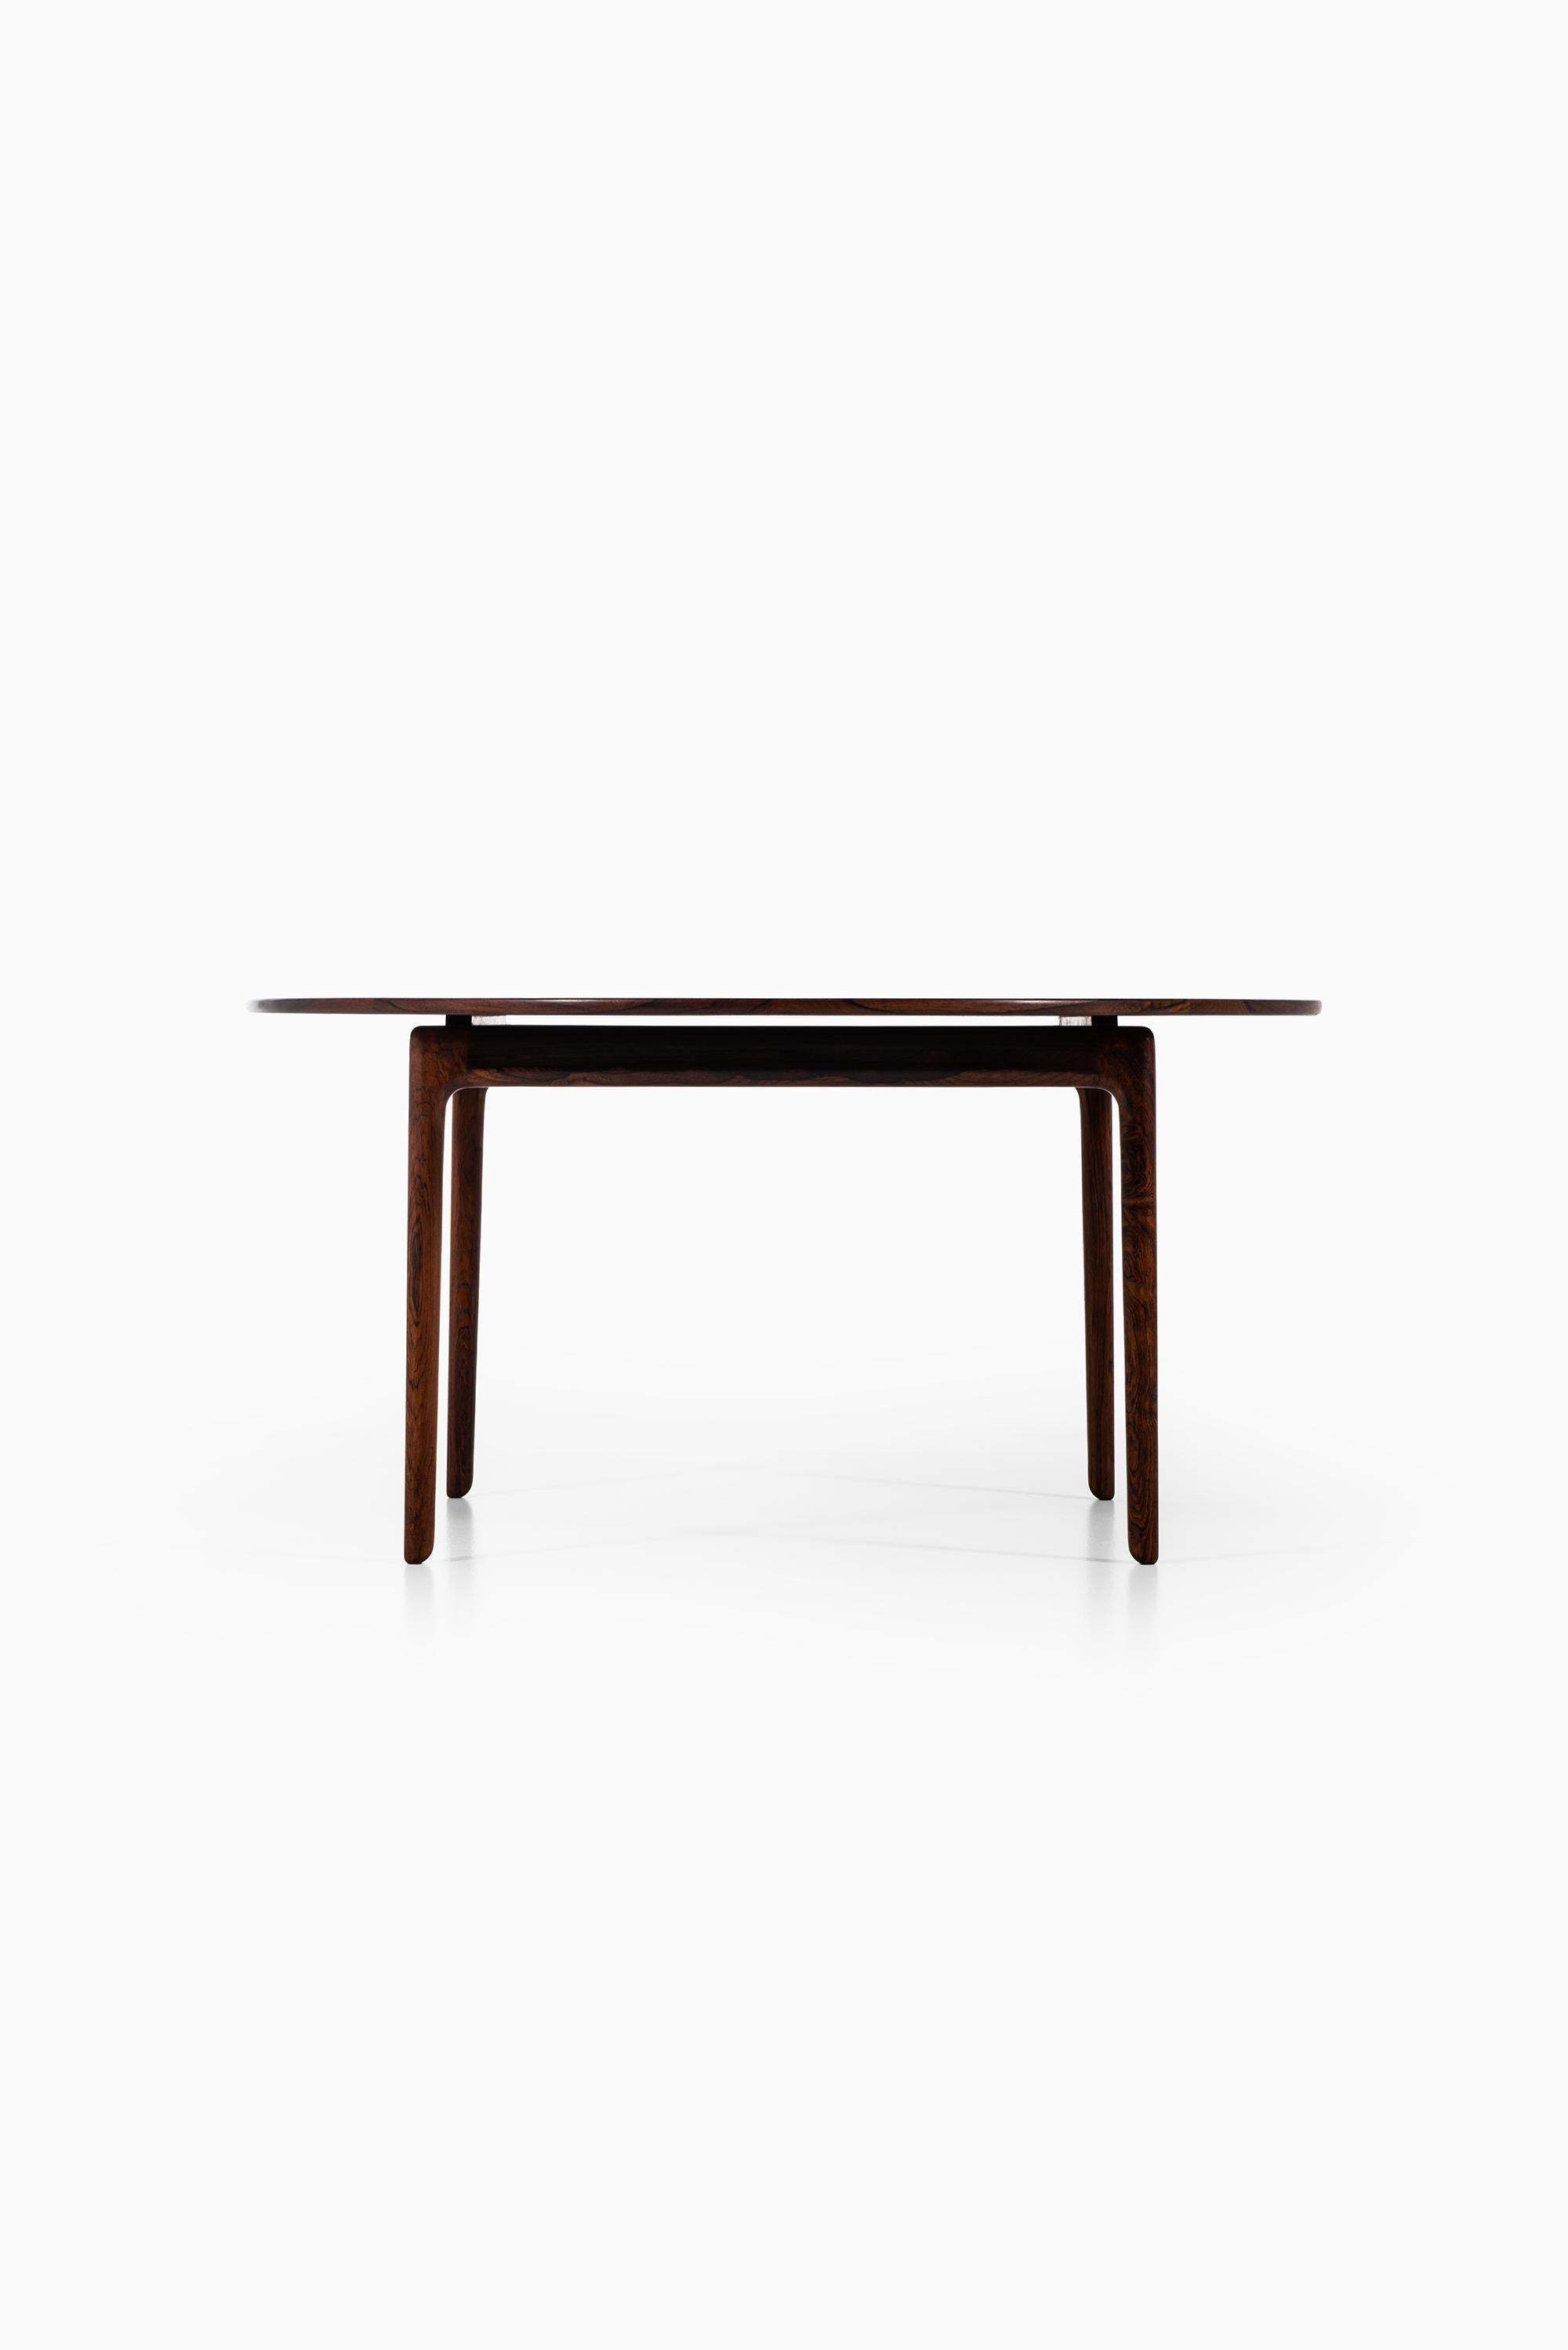 Mid-20th Century Ole Wanscher Coffee Table Produced by P. Jeppesens Møbelfabrik in Denmark For Sale